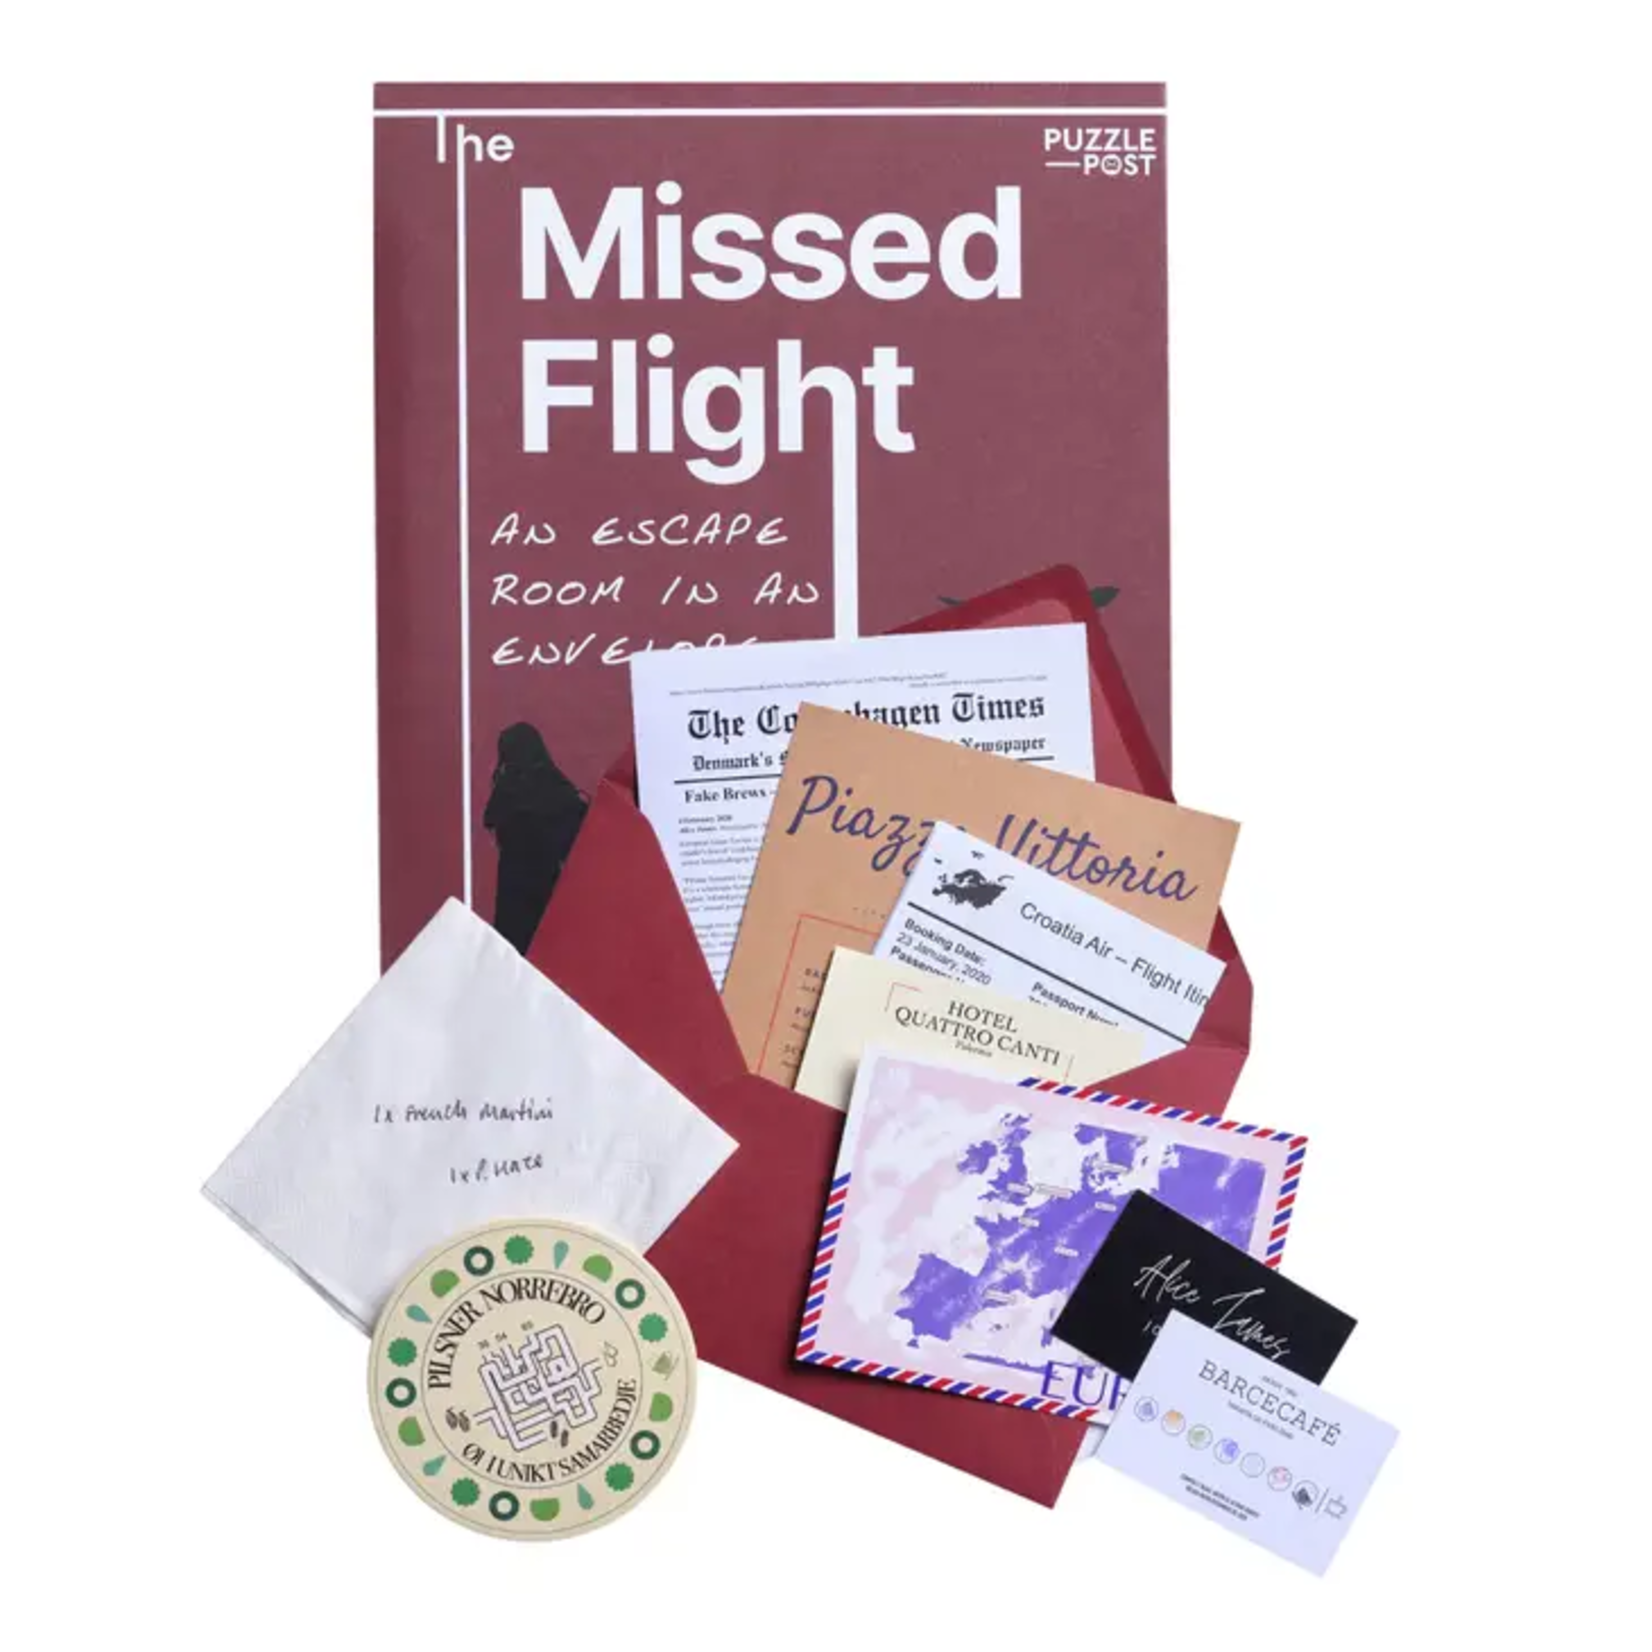 Escape Room in an Envelope - The Missed Flight